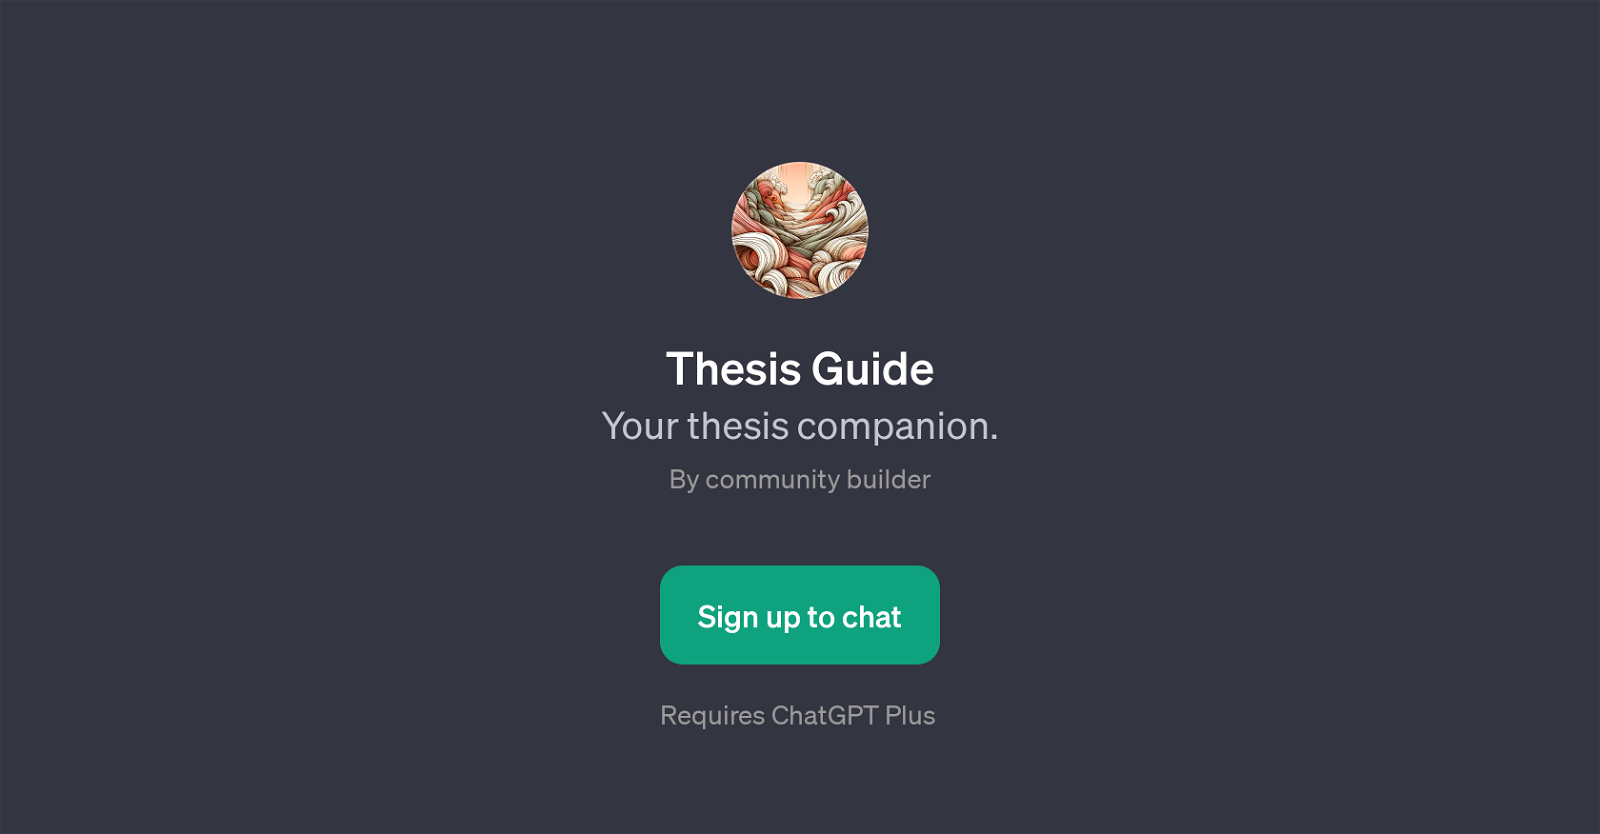 Thesis Guide website